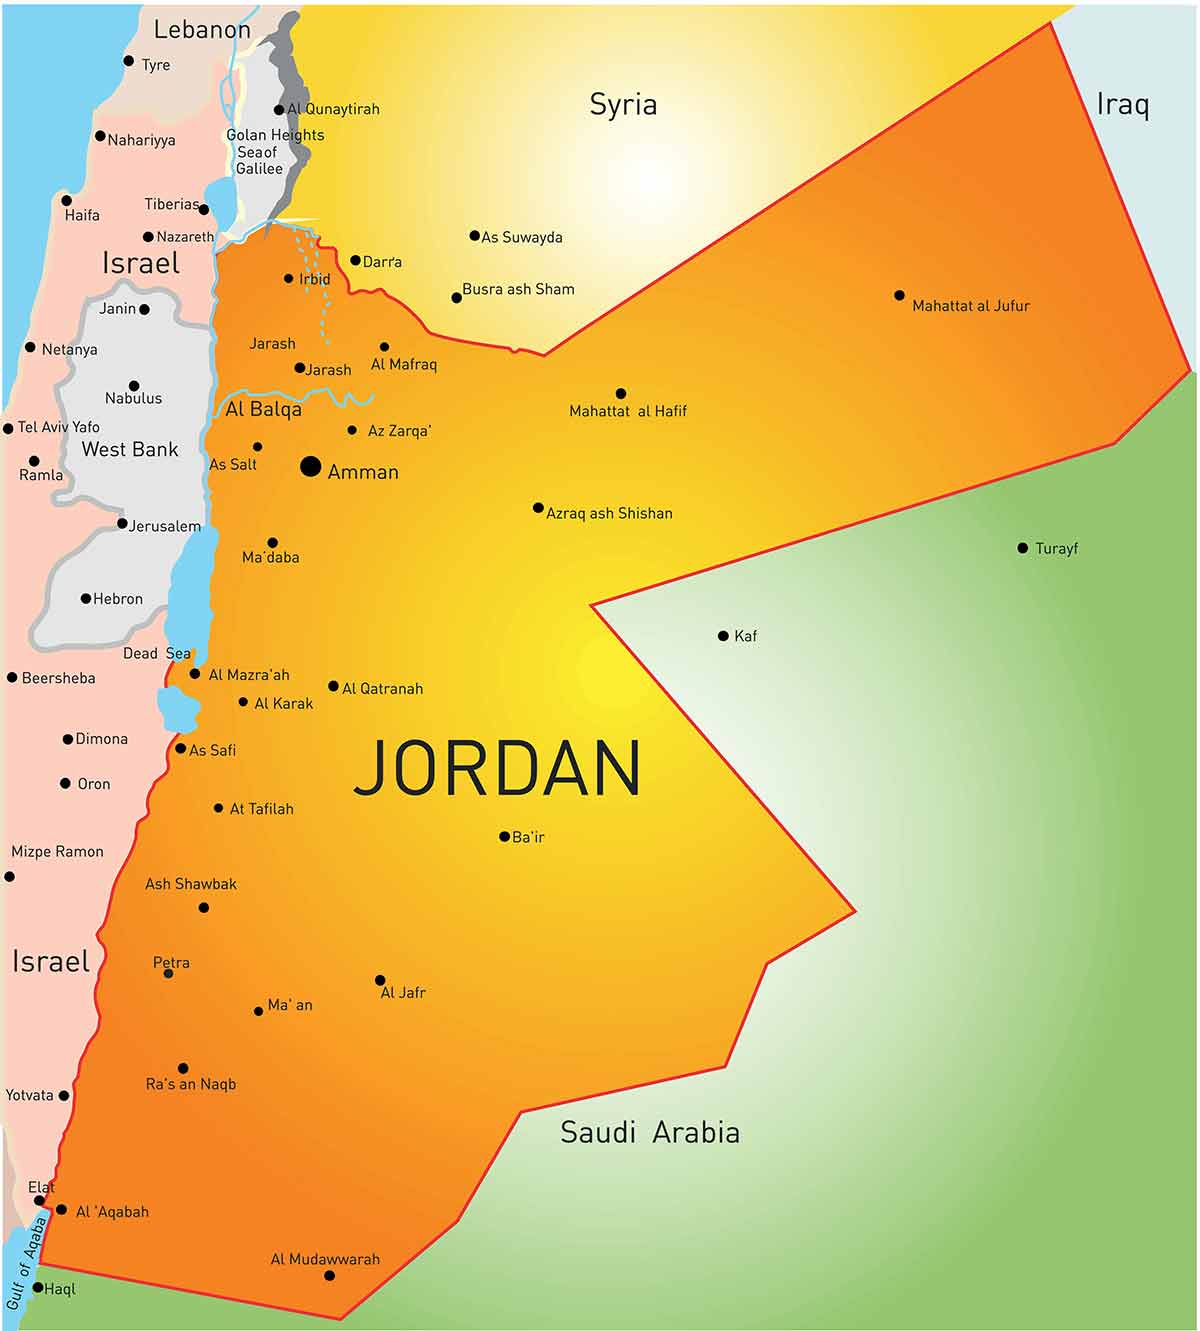 Map with a list of towns and cities in Jordan